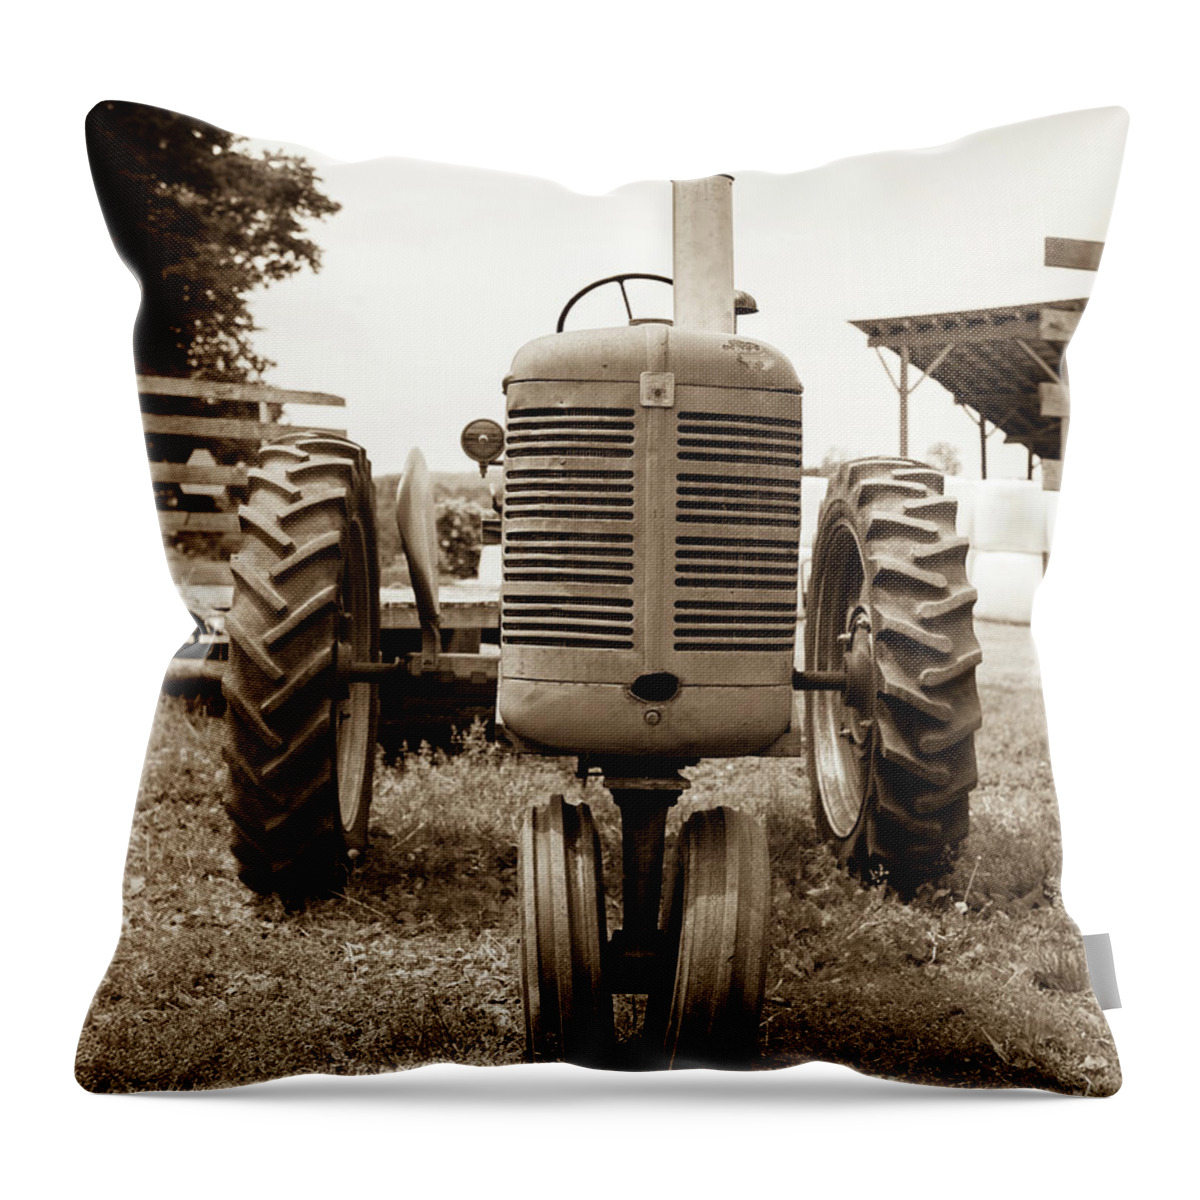 Cornish Throw Pillow featuring the photograph Old Vintage Tractor Cornish New Hampshire by Edward Fielding